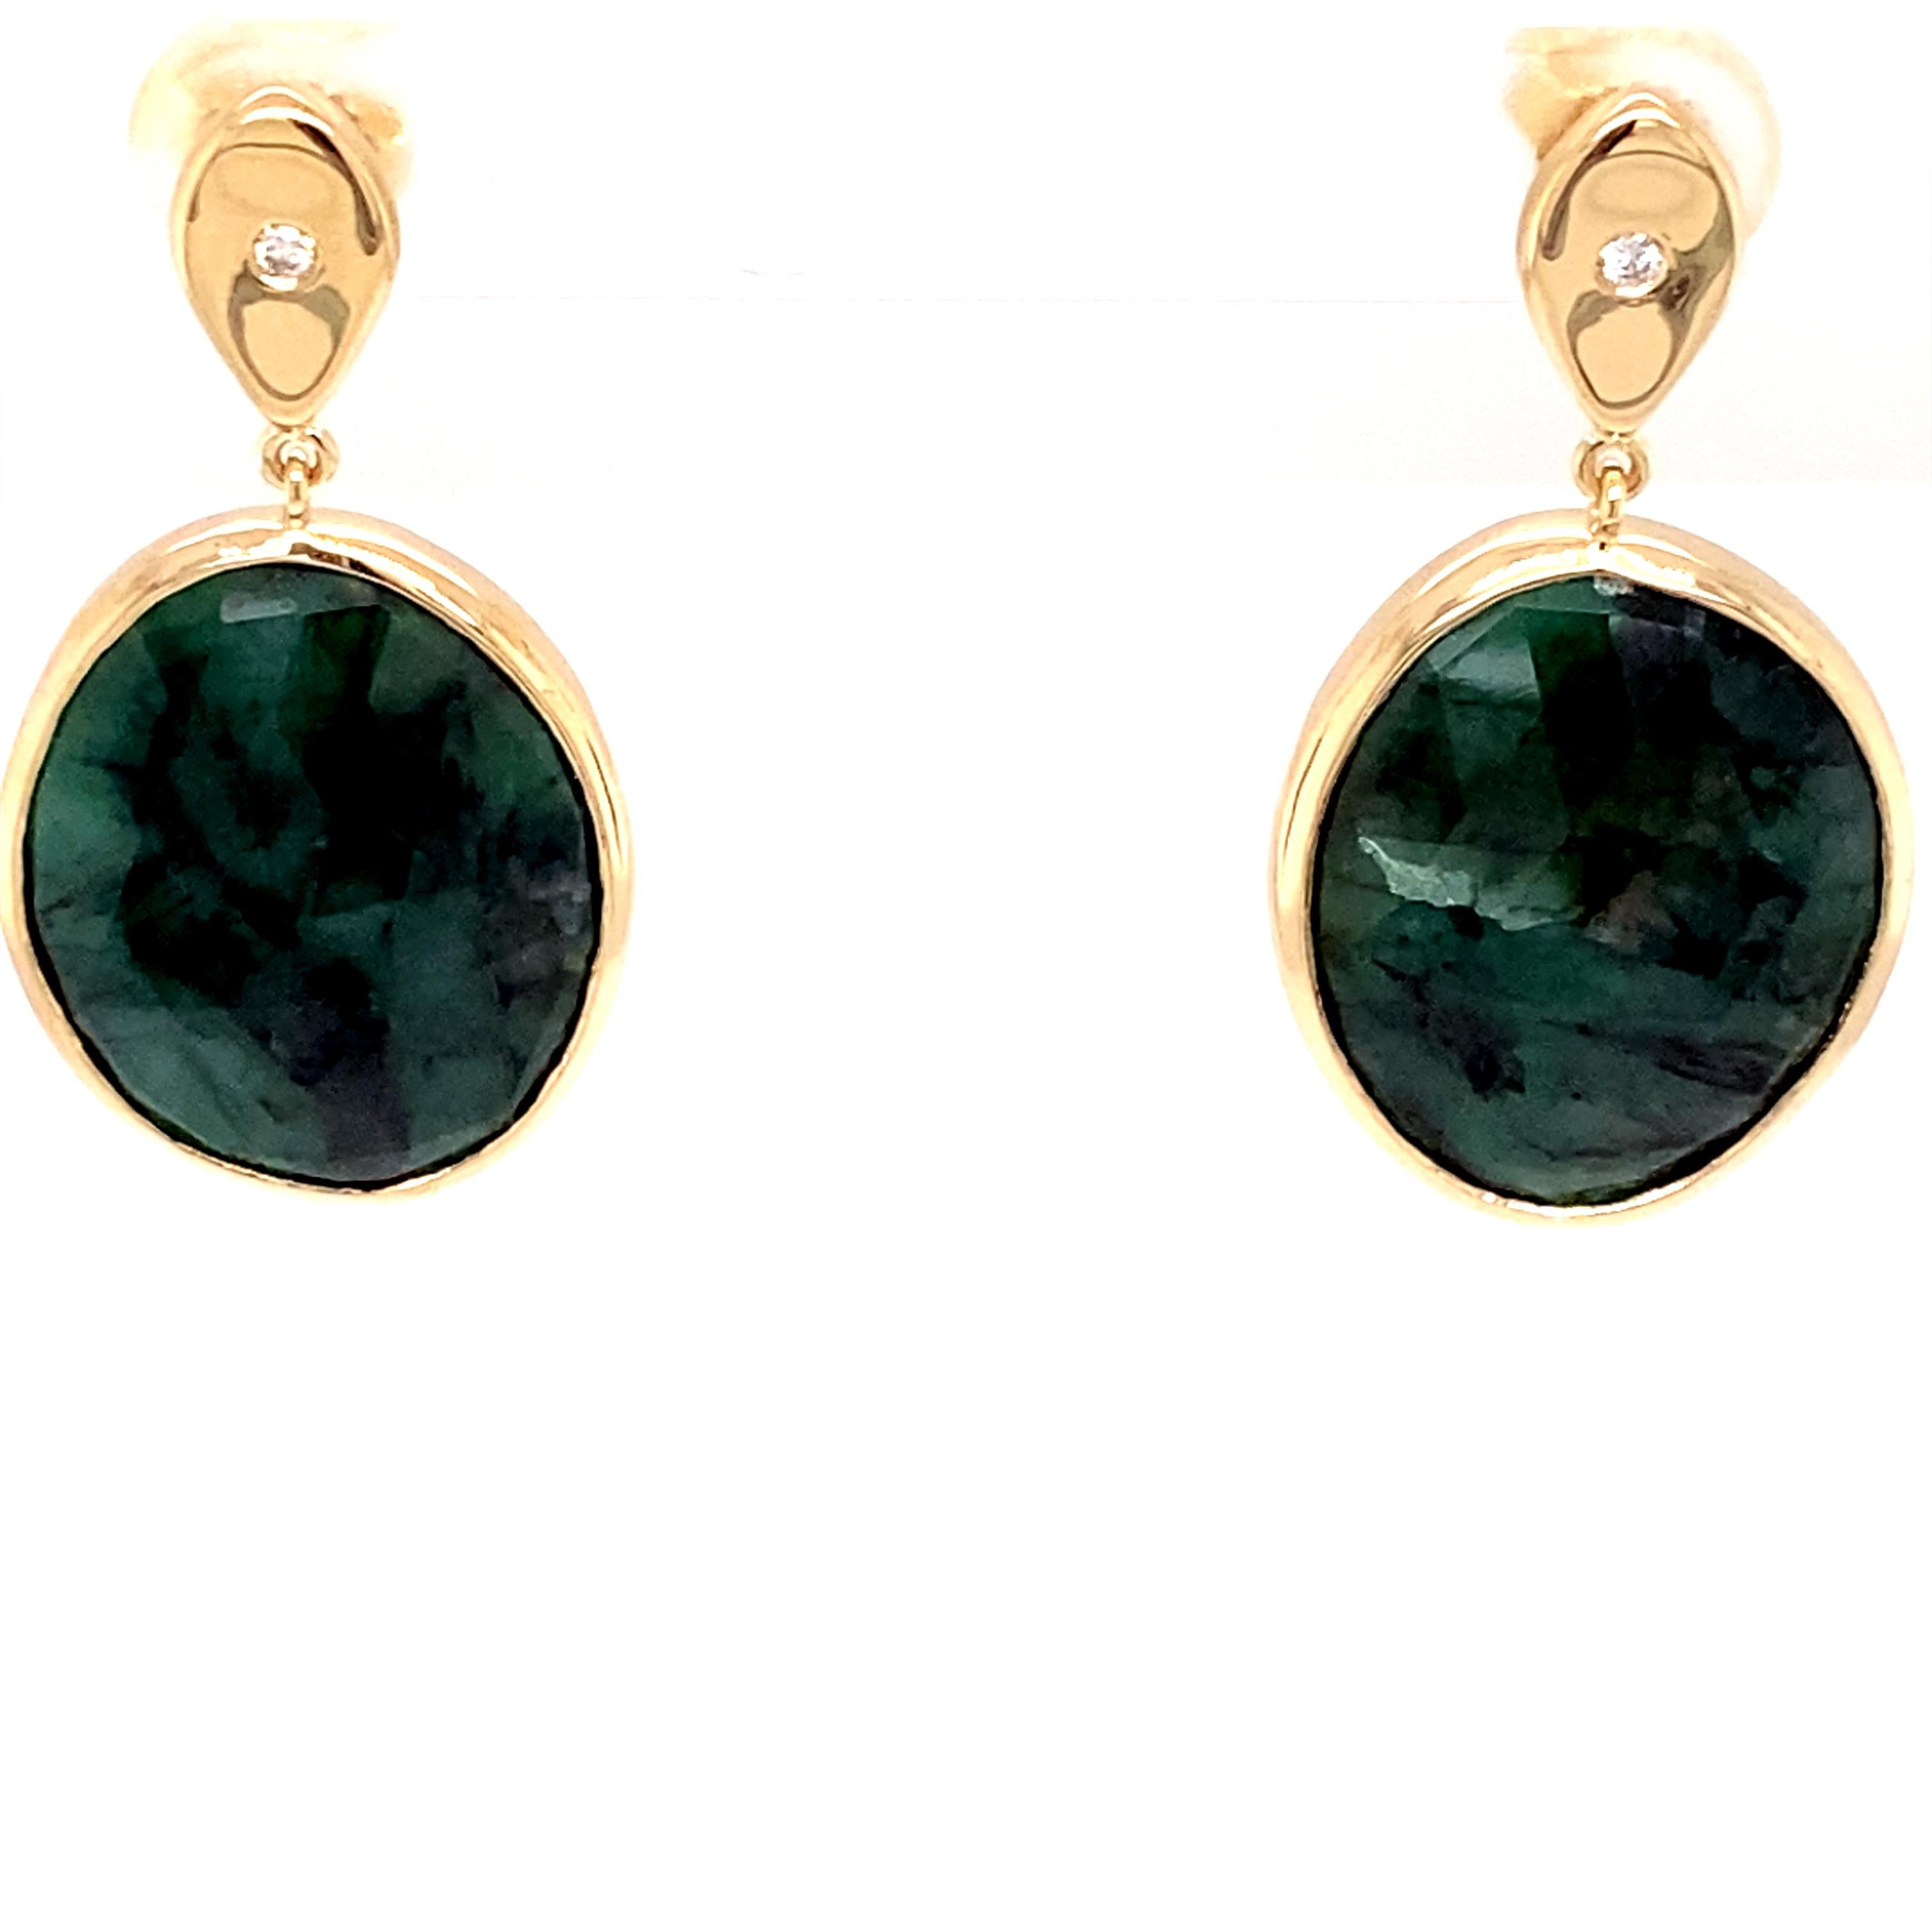 These earrings feature meticulously cut and polished emerald slices, each radiating a captivating green hue that is both vibrant and alluring.

Crafted from the finest materials, these earrings boast a sleek and sophisticated design that complements